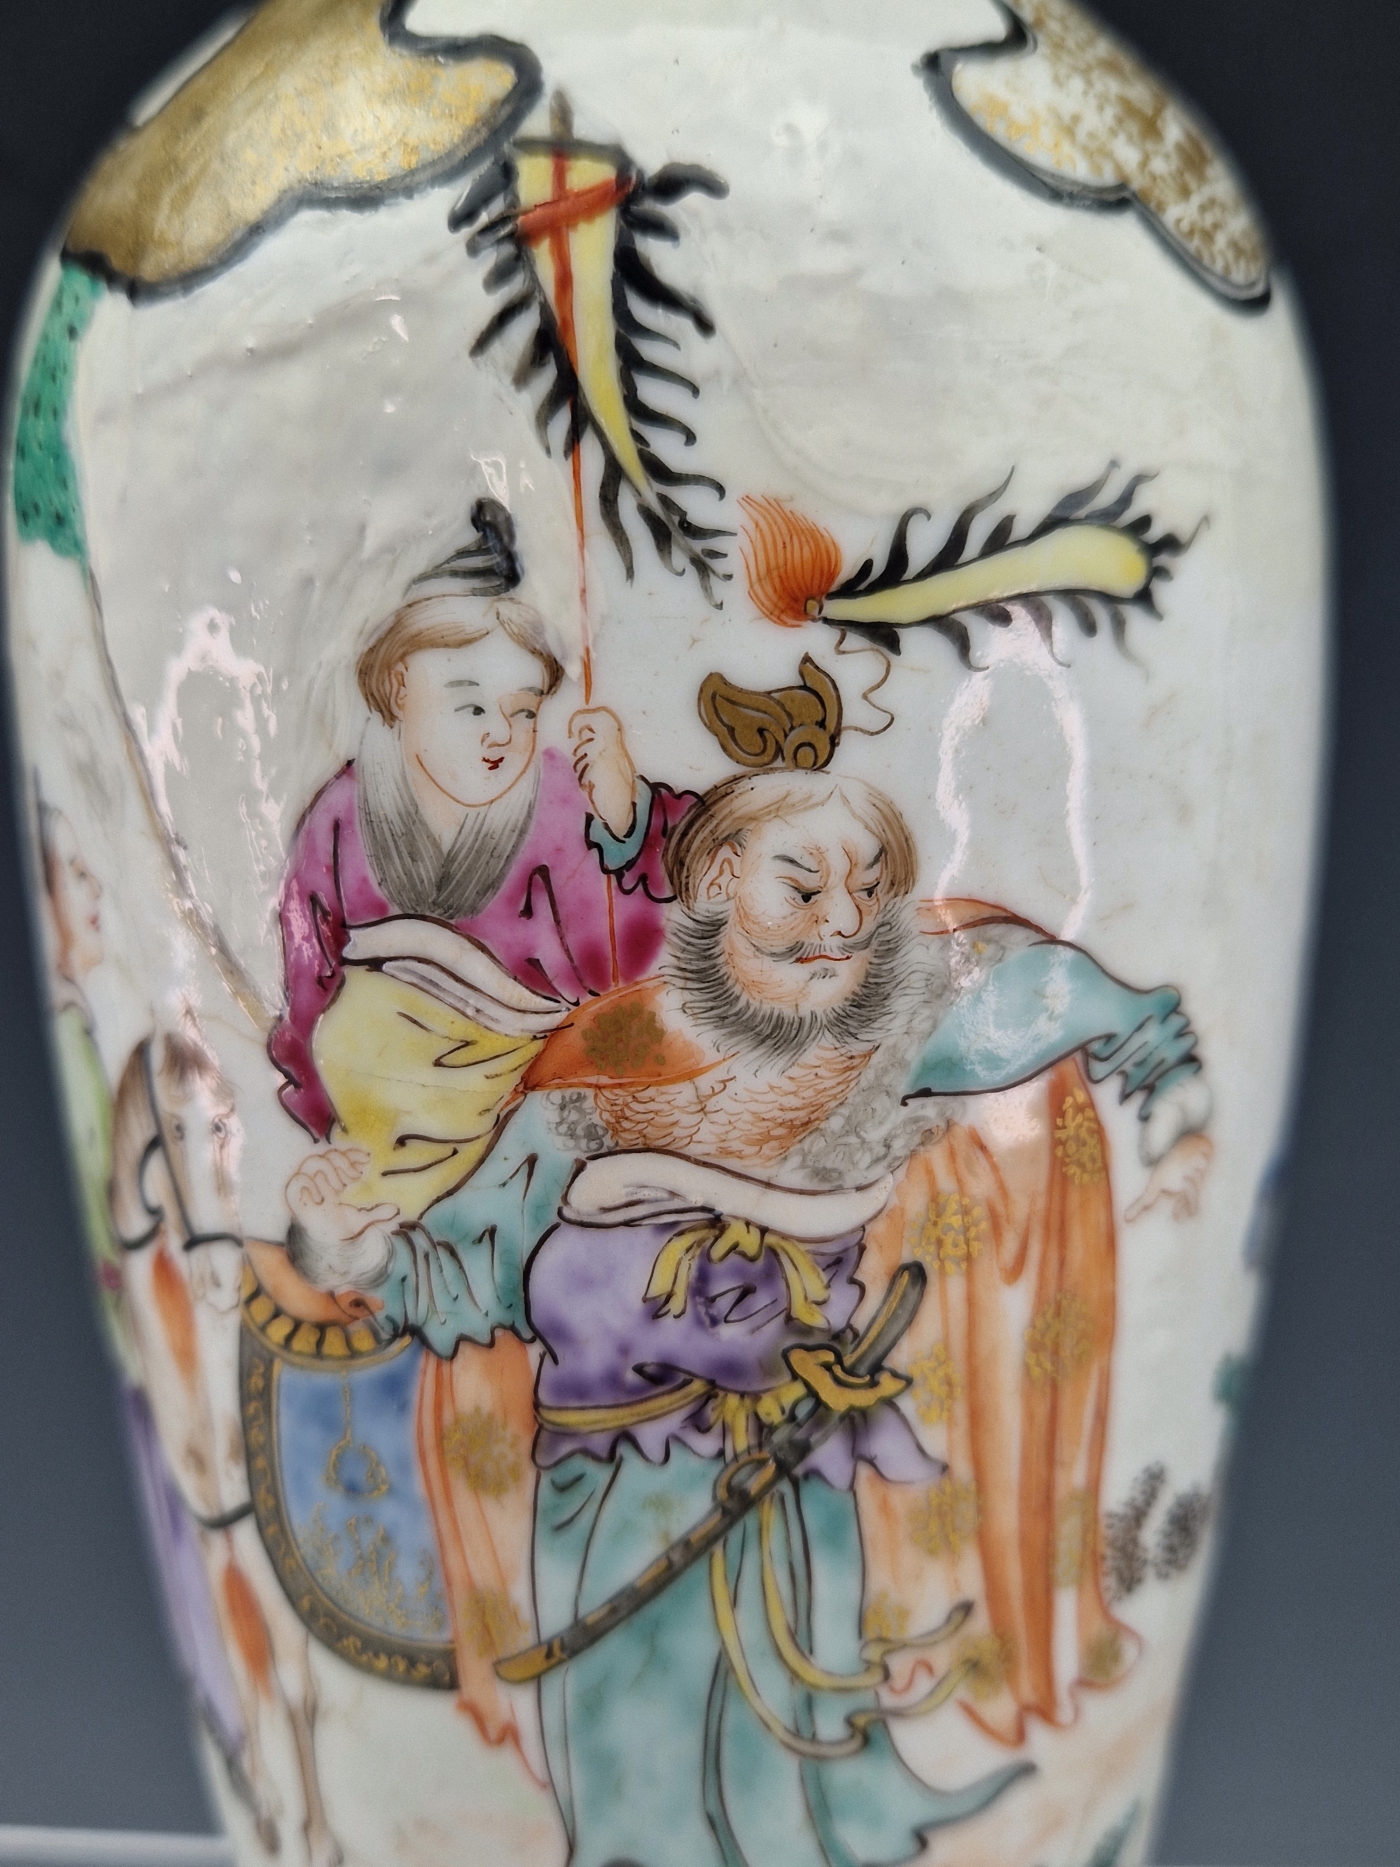 A LATE 18th C. CHINESE VASE PAINTED WITH GUANDI AND OTHER FIGURES IN A LANDSCAPE AND BETWEEN BLACK - Image 2 of 8